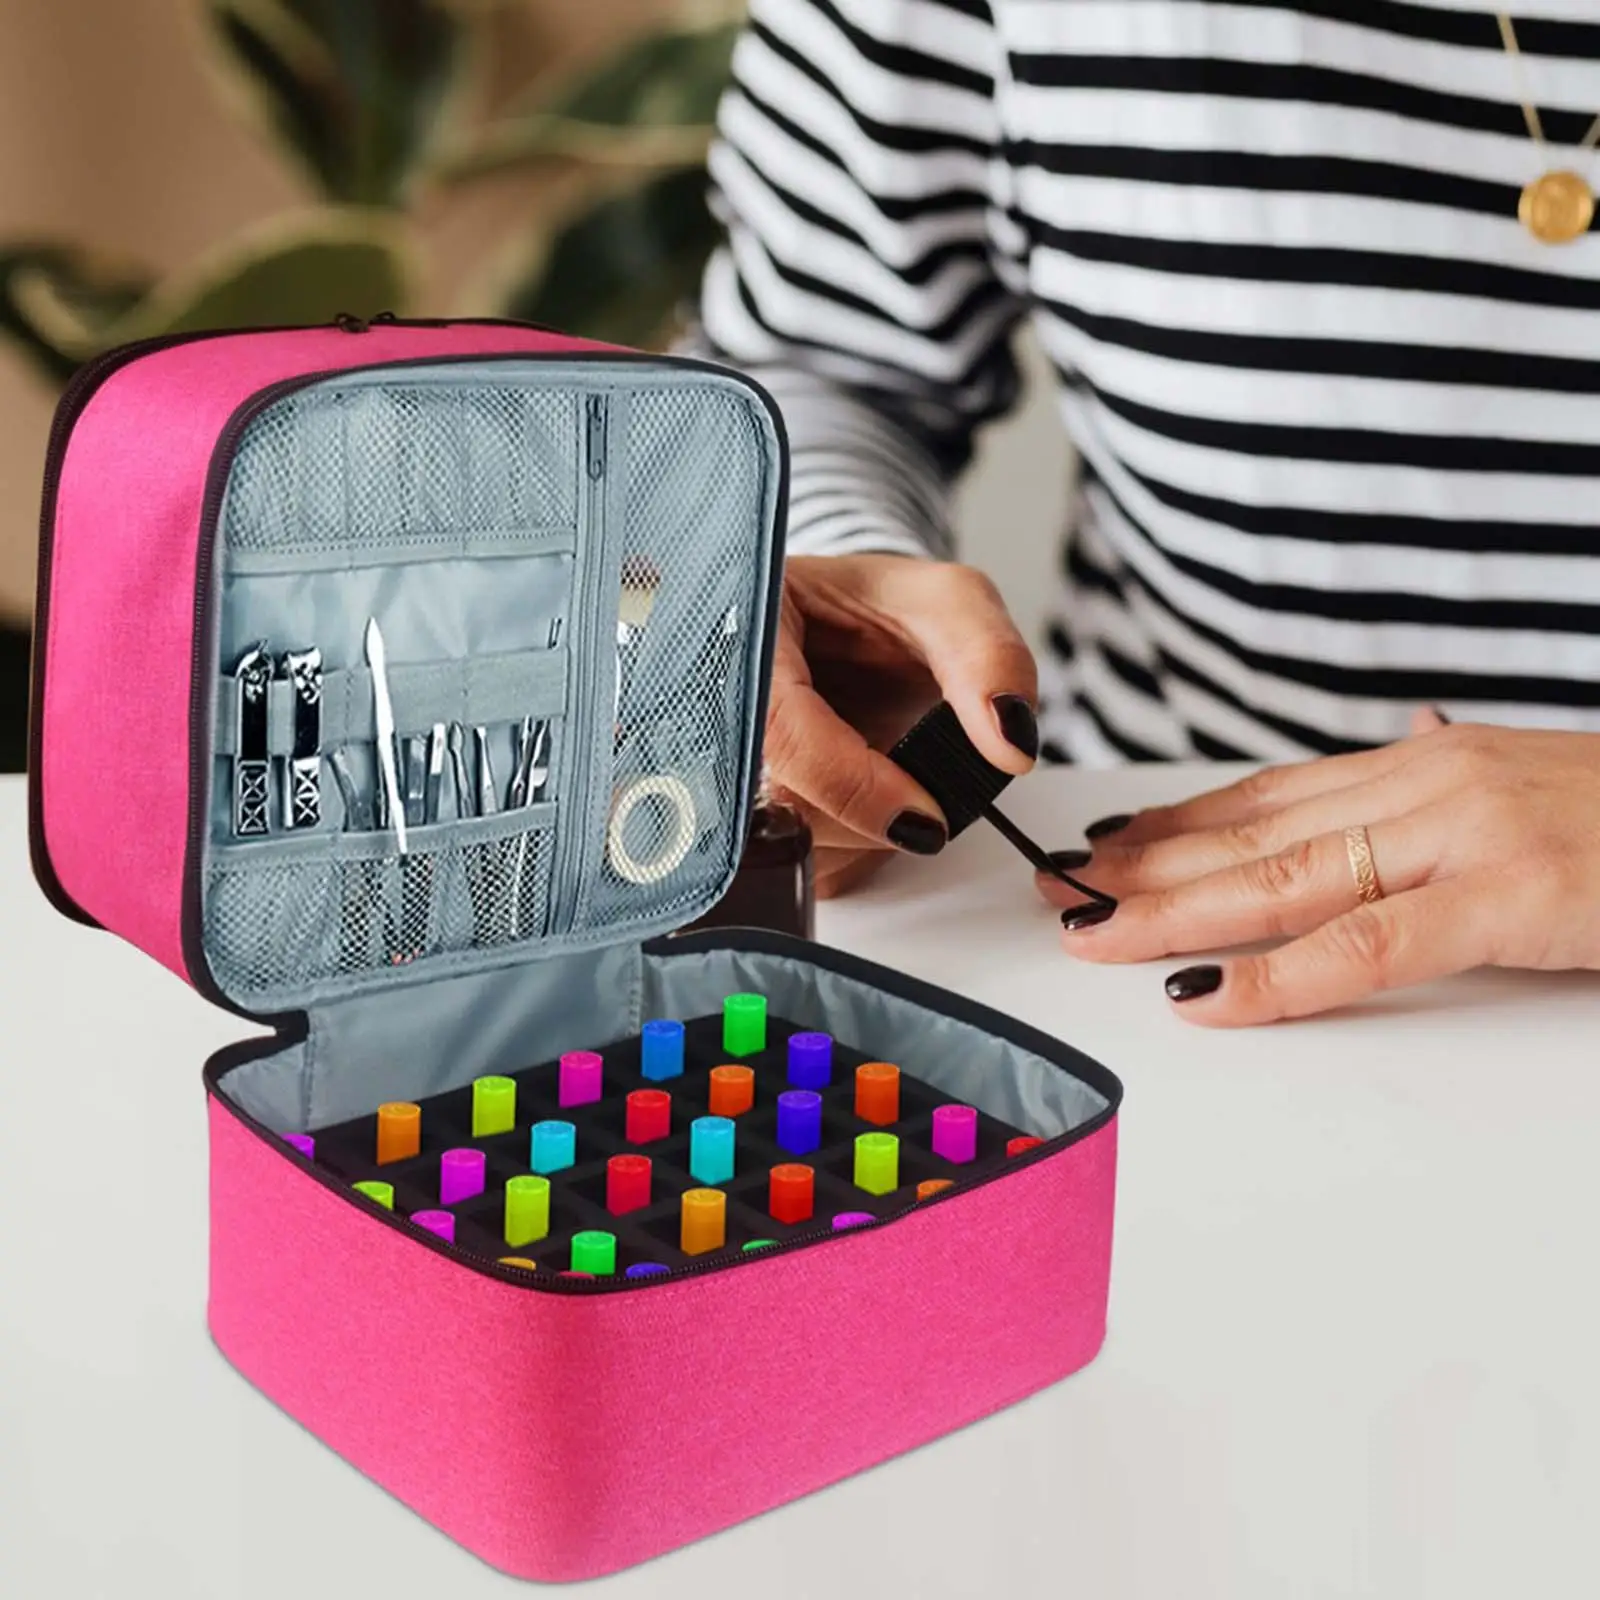 Nail Polish Storage Bag Holds 30 Bottles with Adjustable Dividers Large Nylon Holder Carrying Case for Essential Oil Lipstick